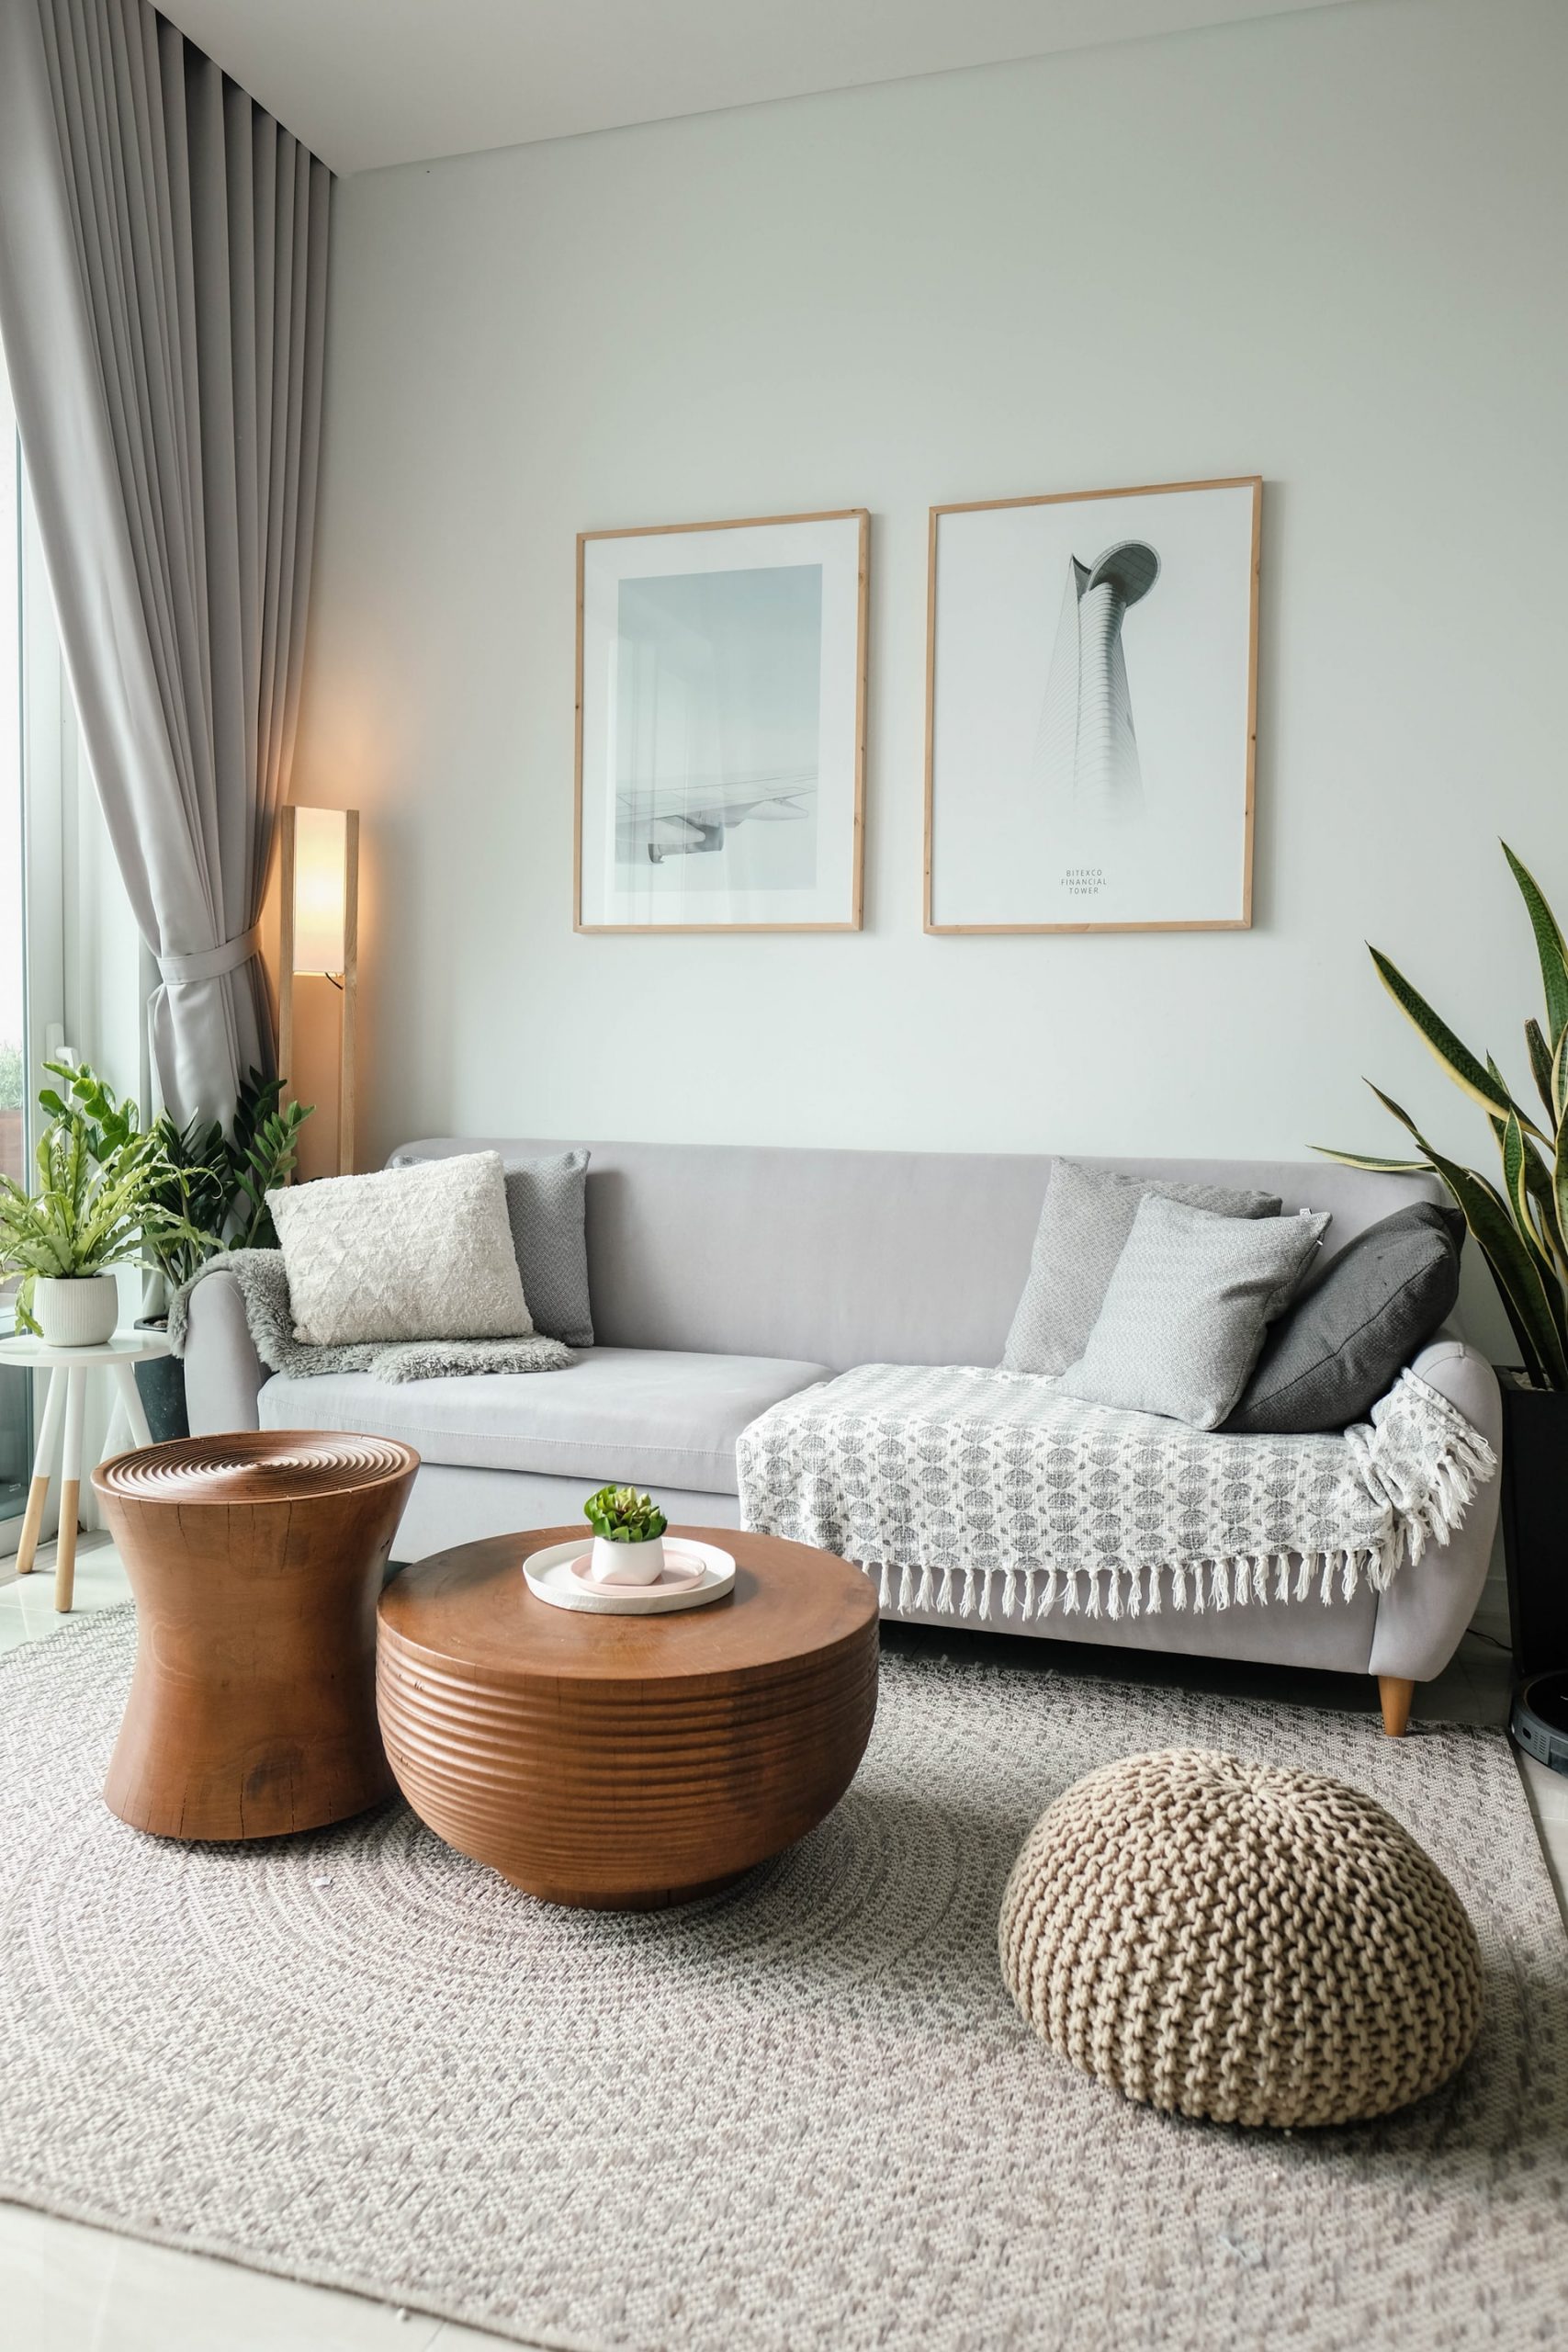 Entertaining Essentials: Creating A Living Room Ready For Guests